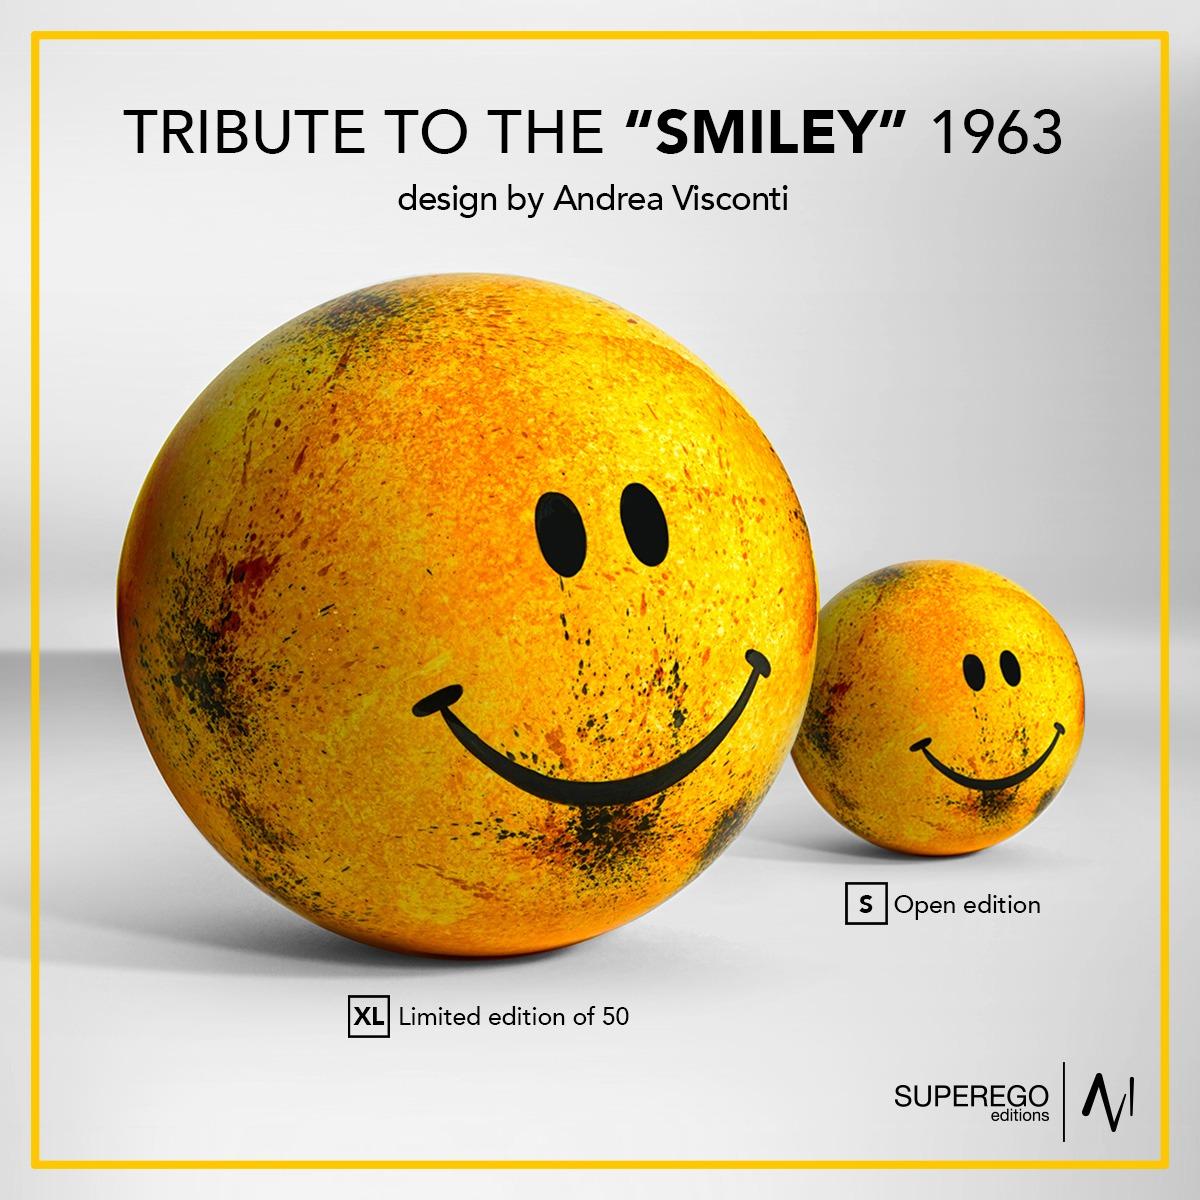 Enameled Tribute to Smile 1963 by Andrea Visconti for Superego Editions, Italy For Sale